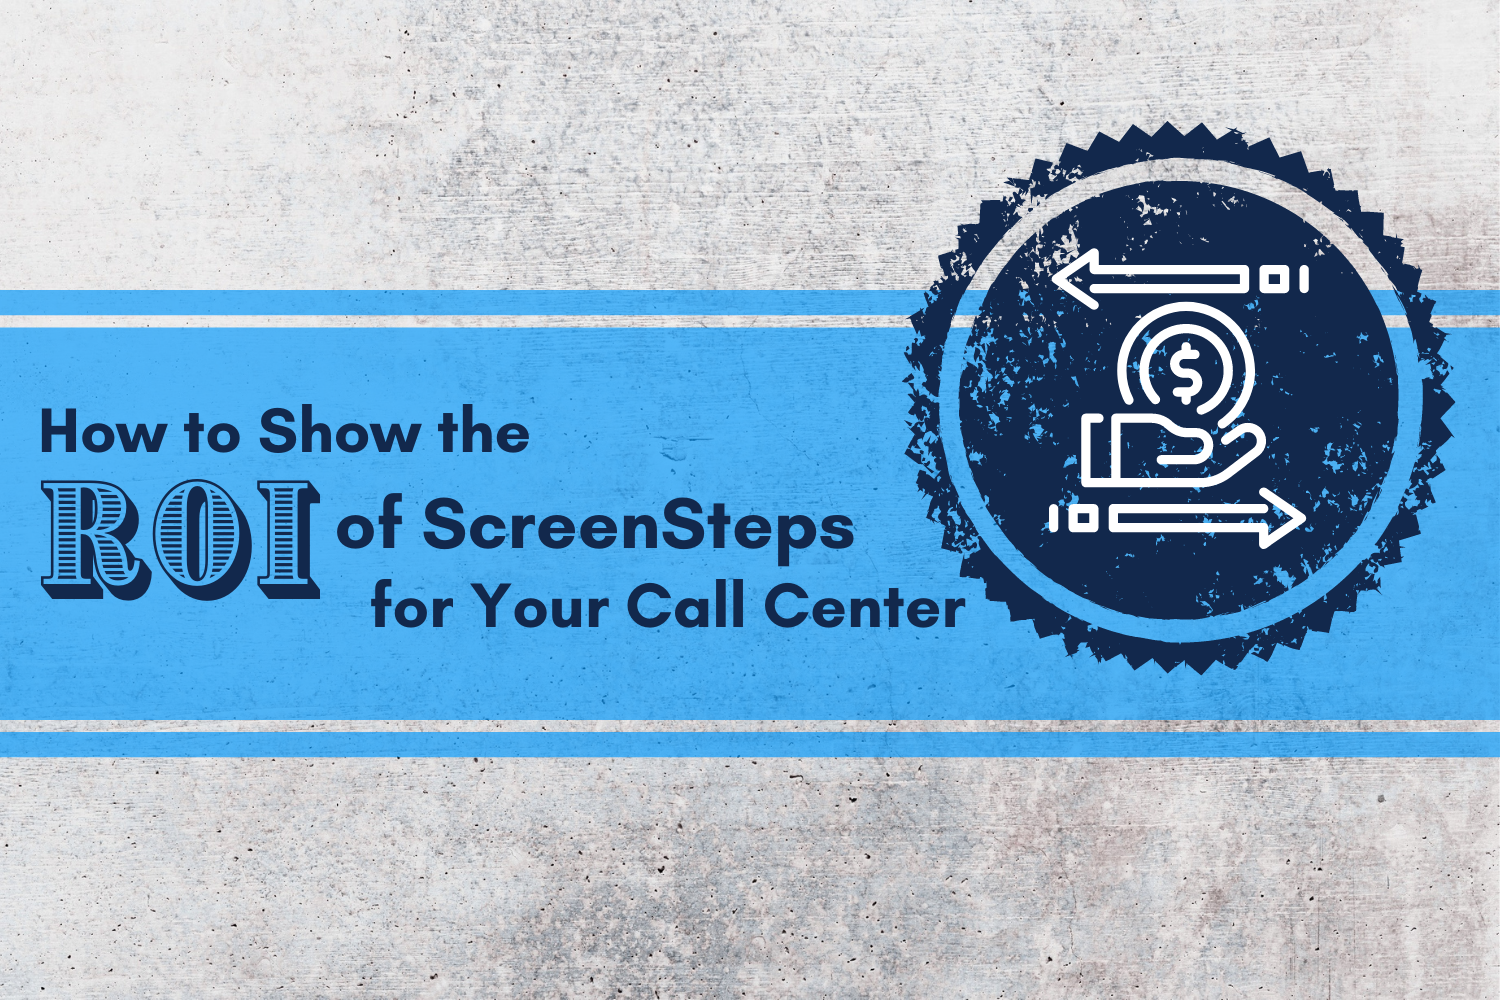 How to Show the ROI of ScreenSteps for Your Call Center (3 Ways)